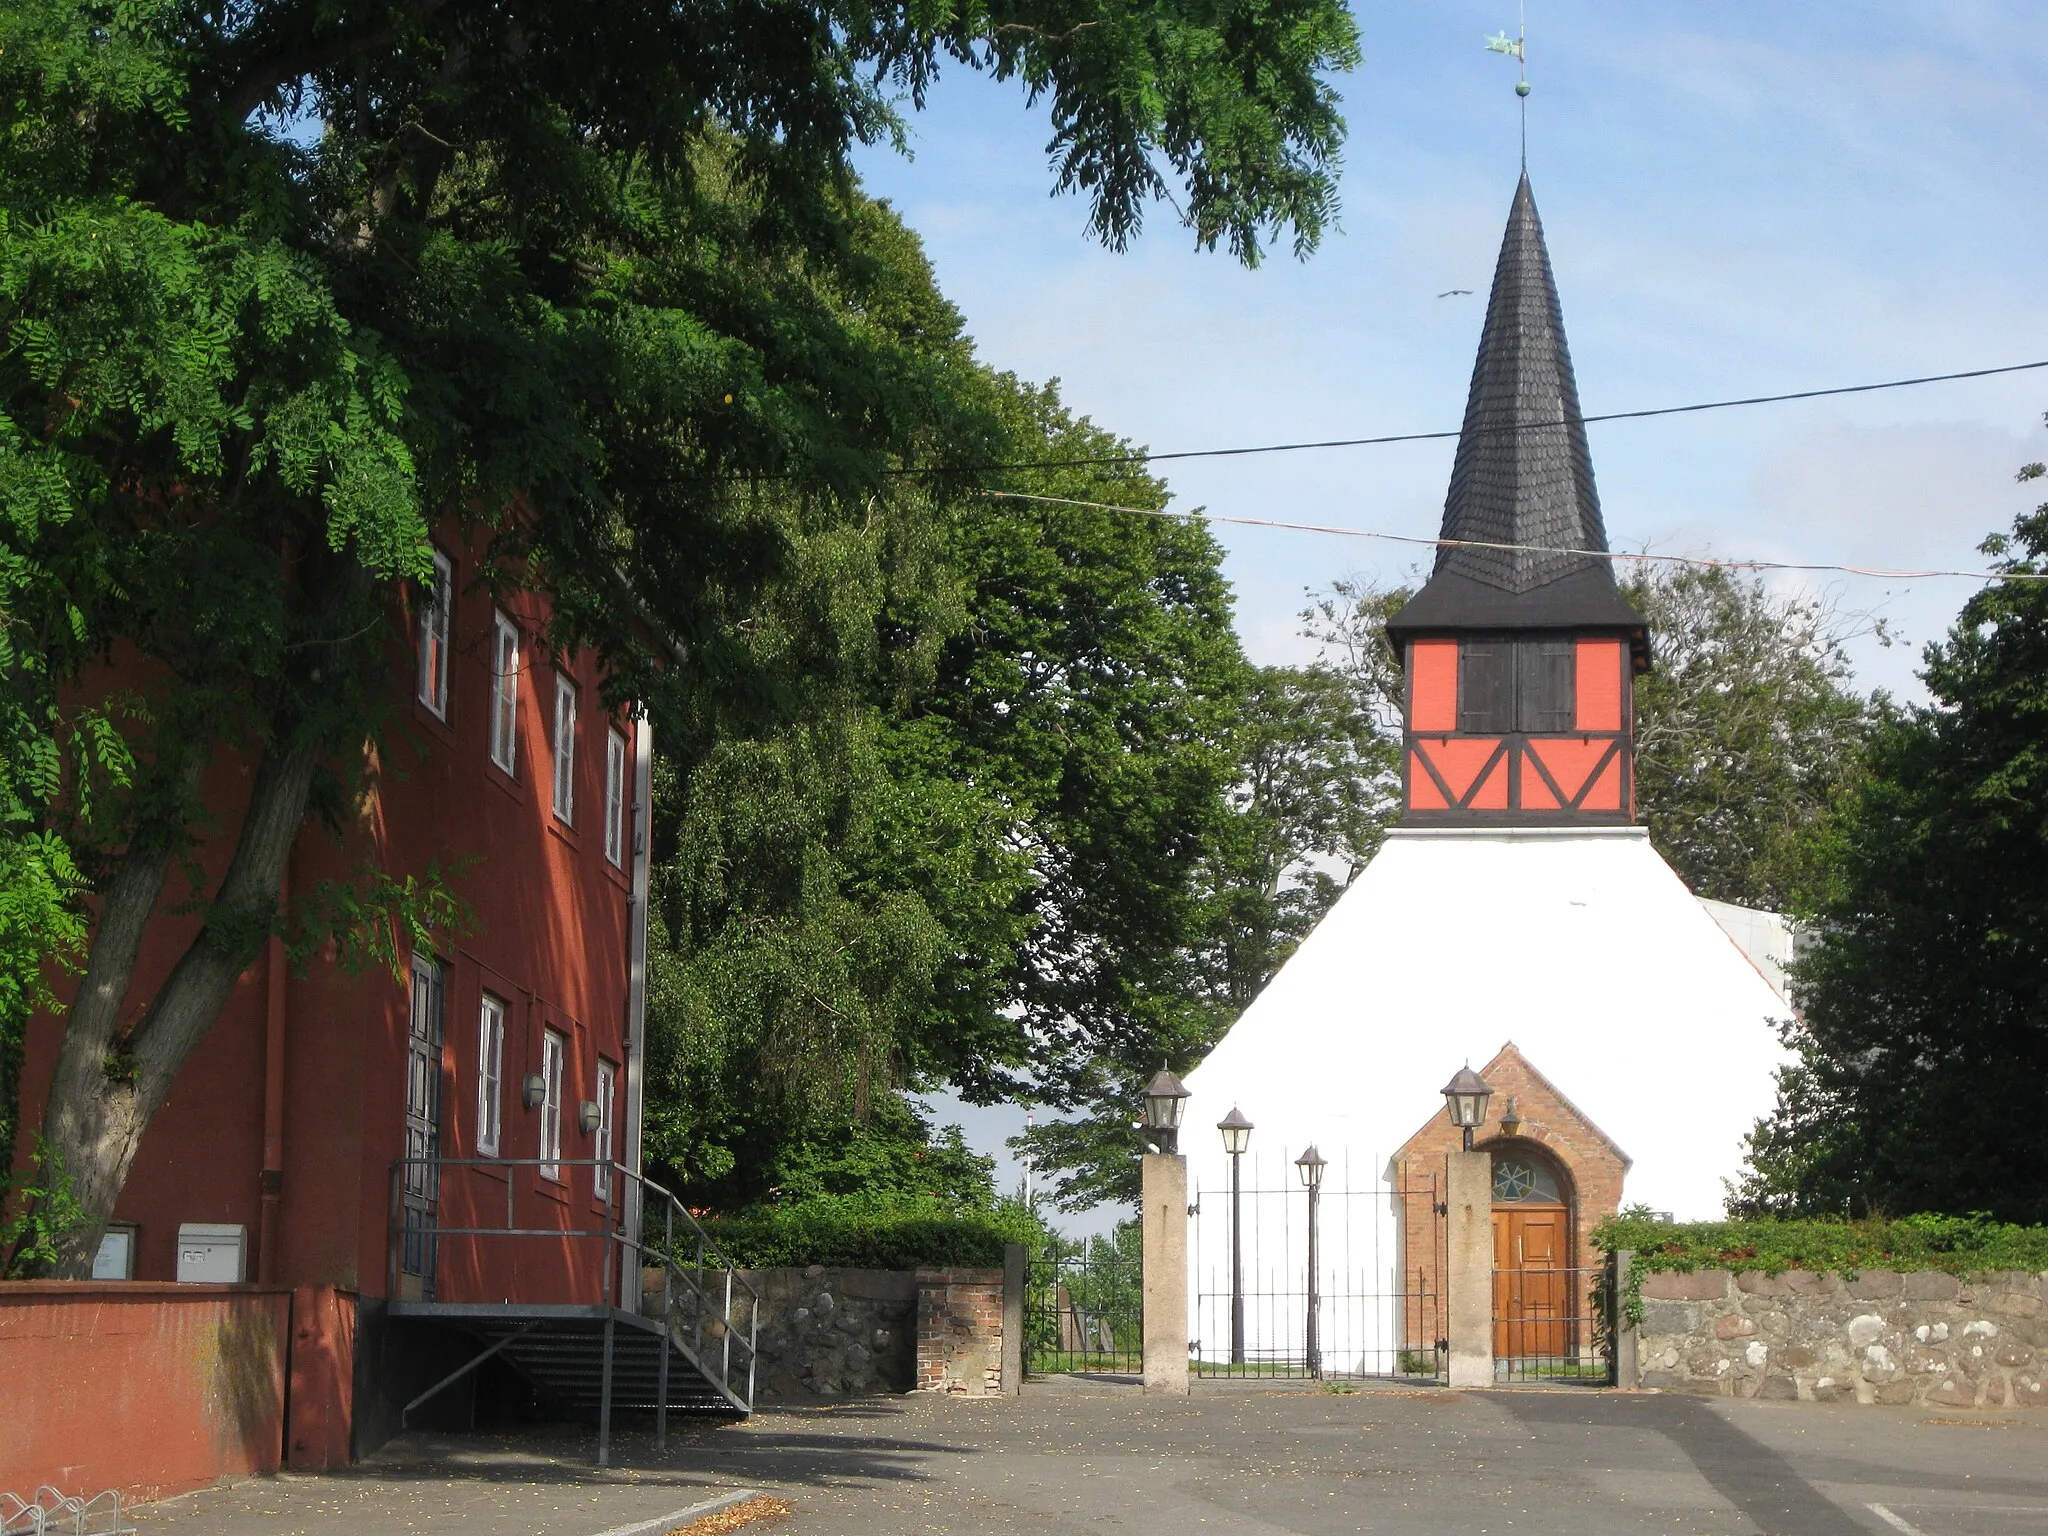 Photo showing: The church "Hasle Kirke" in the small town "Hasle" on the island Bornholm in east Denmark.